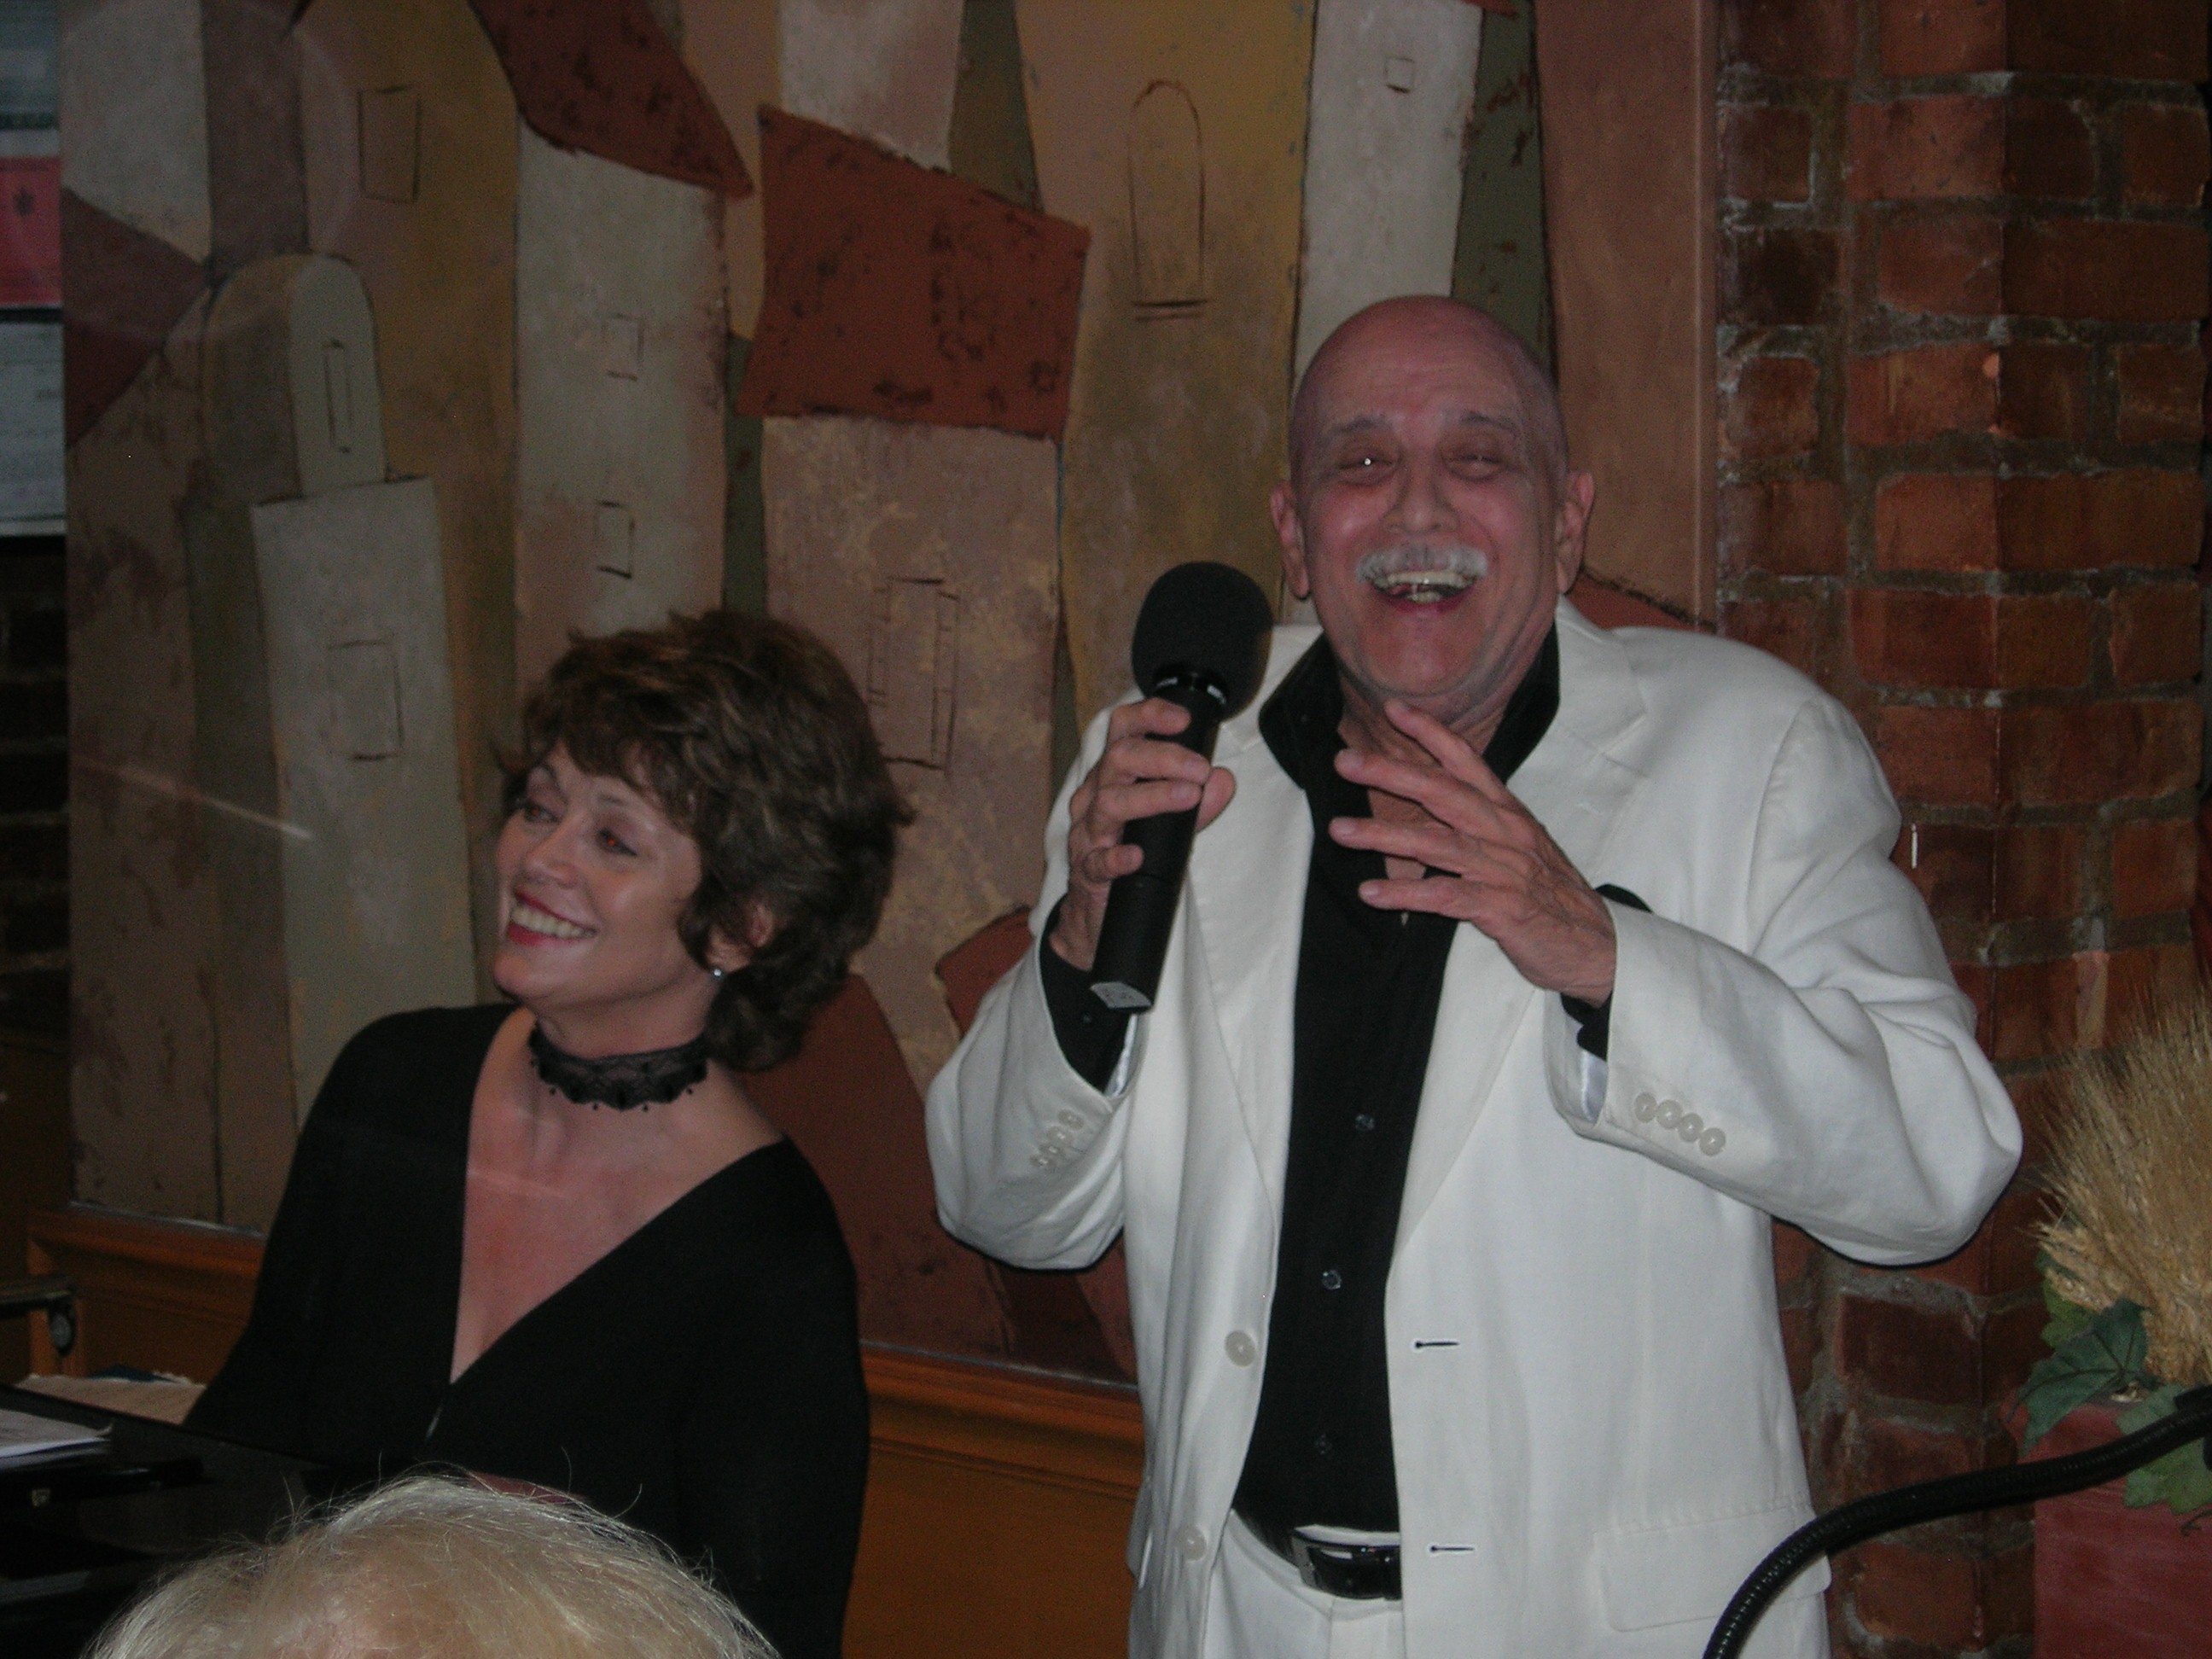 PERFORMING AND HAVING FUN WITH JAZZ GREAT, KATHLEEN LANDIS AT IRVING FIELDS 95th. BIRTHDAY PARTY. 8/4/10